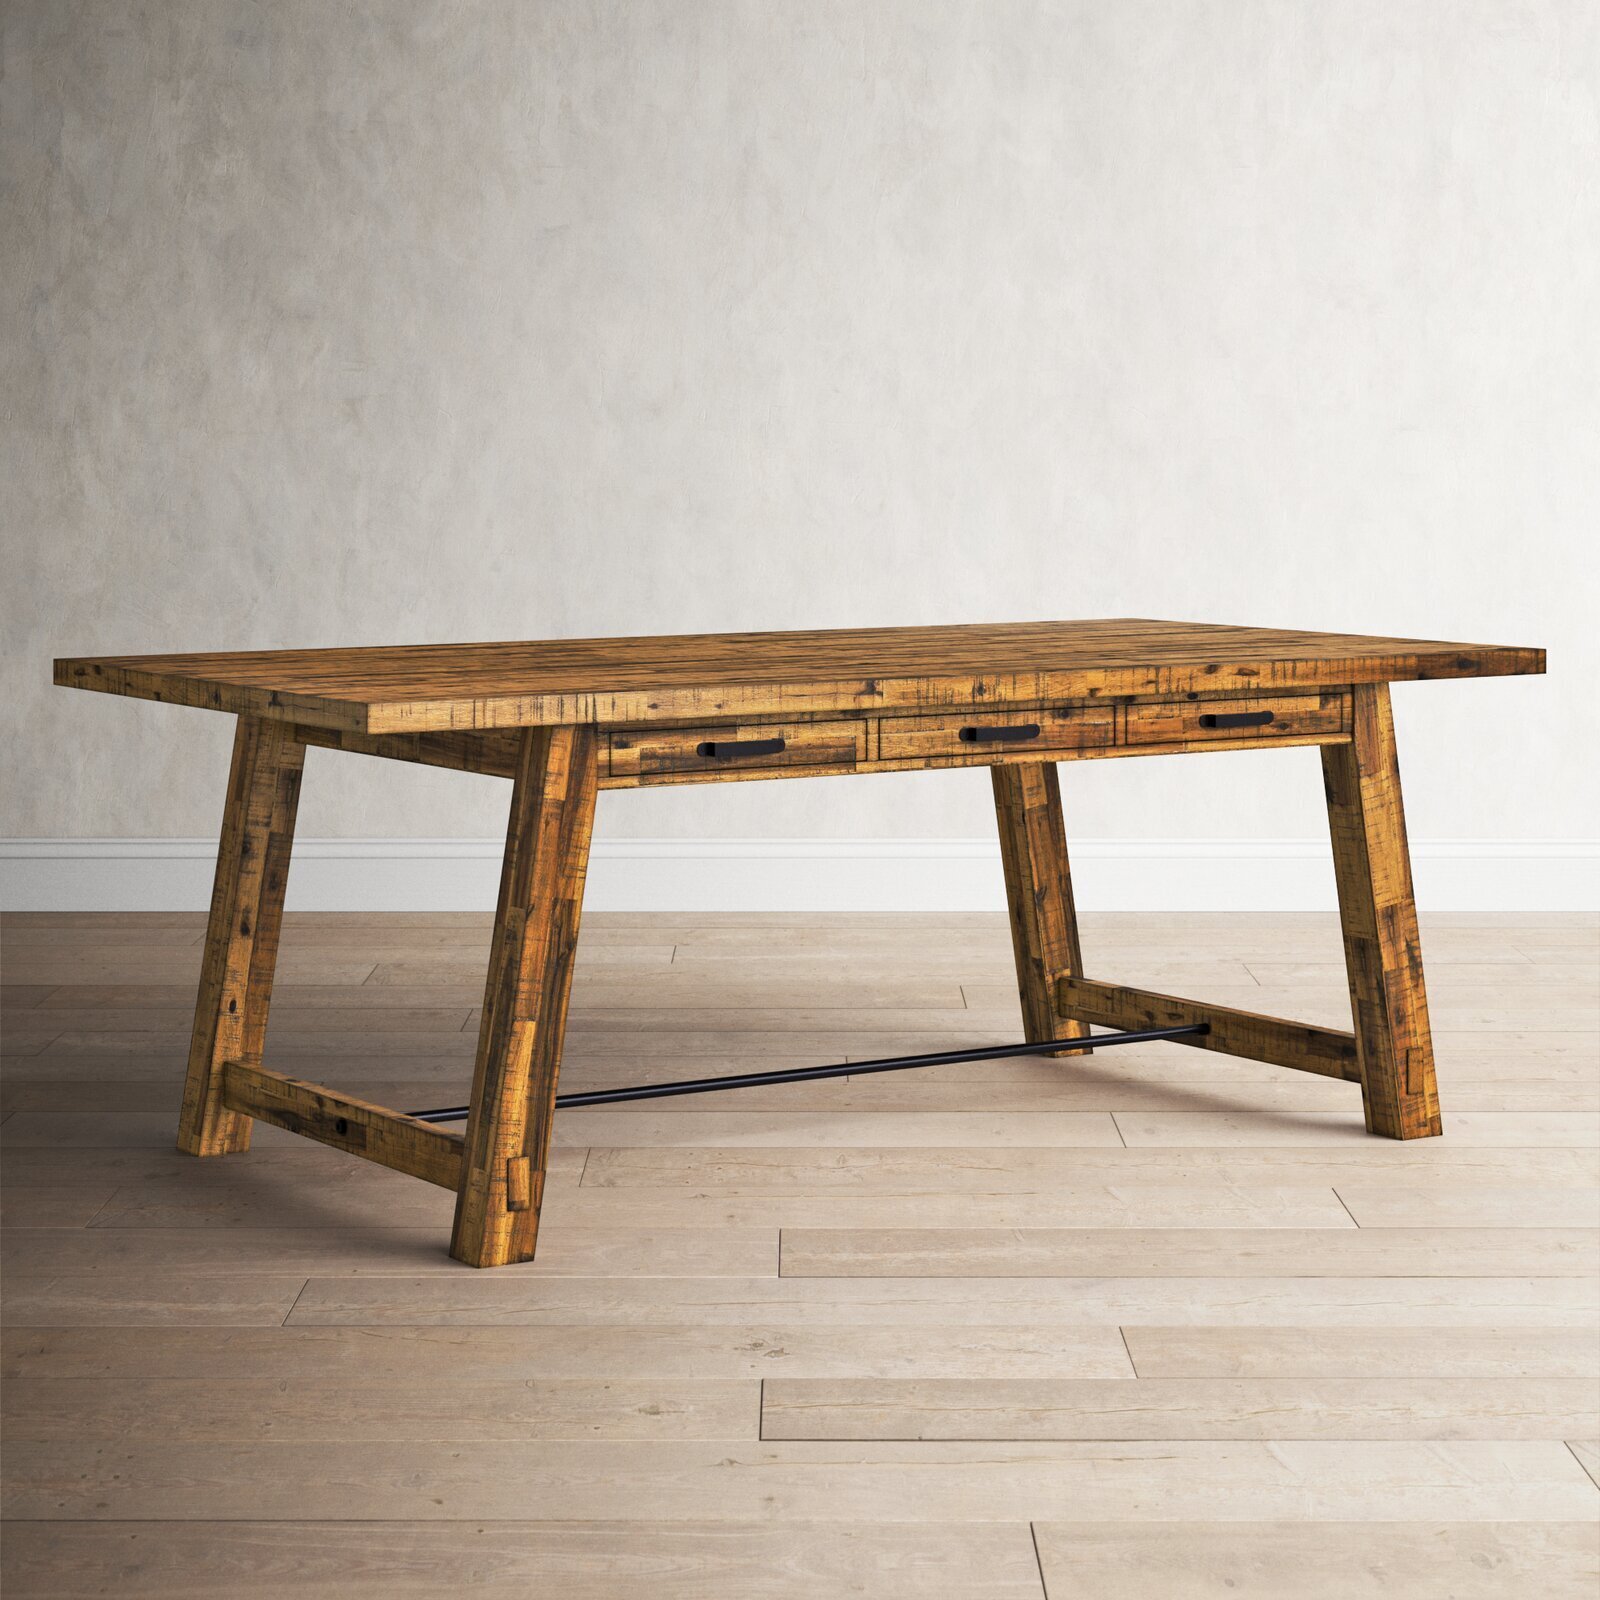 Craftsman dining table with storage